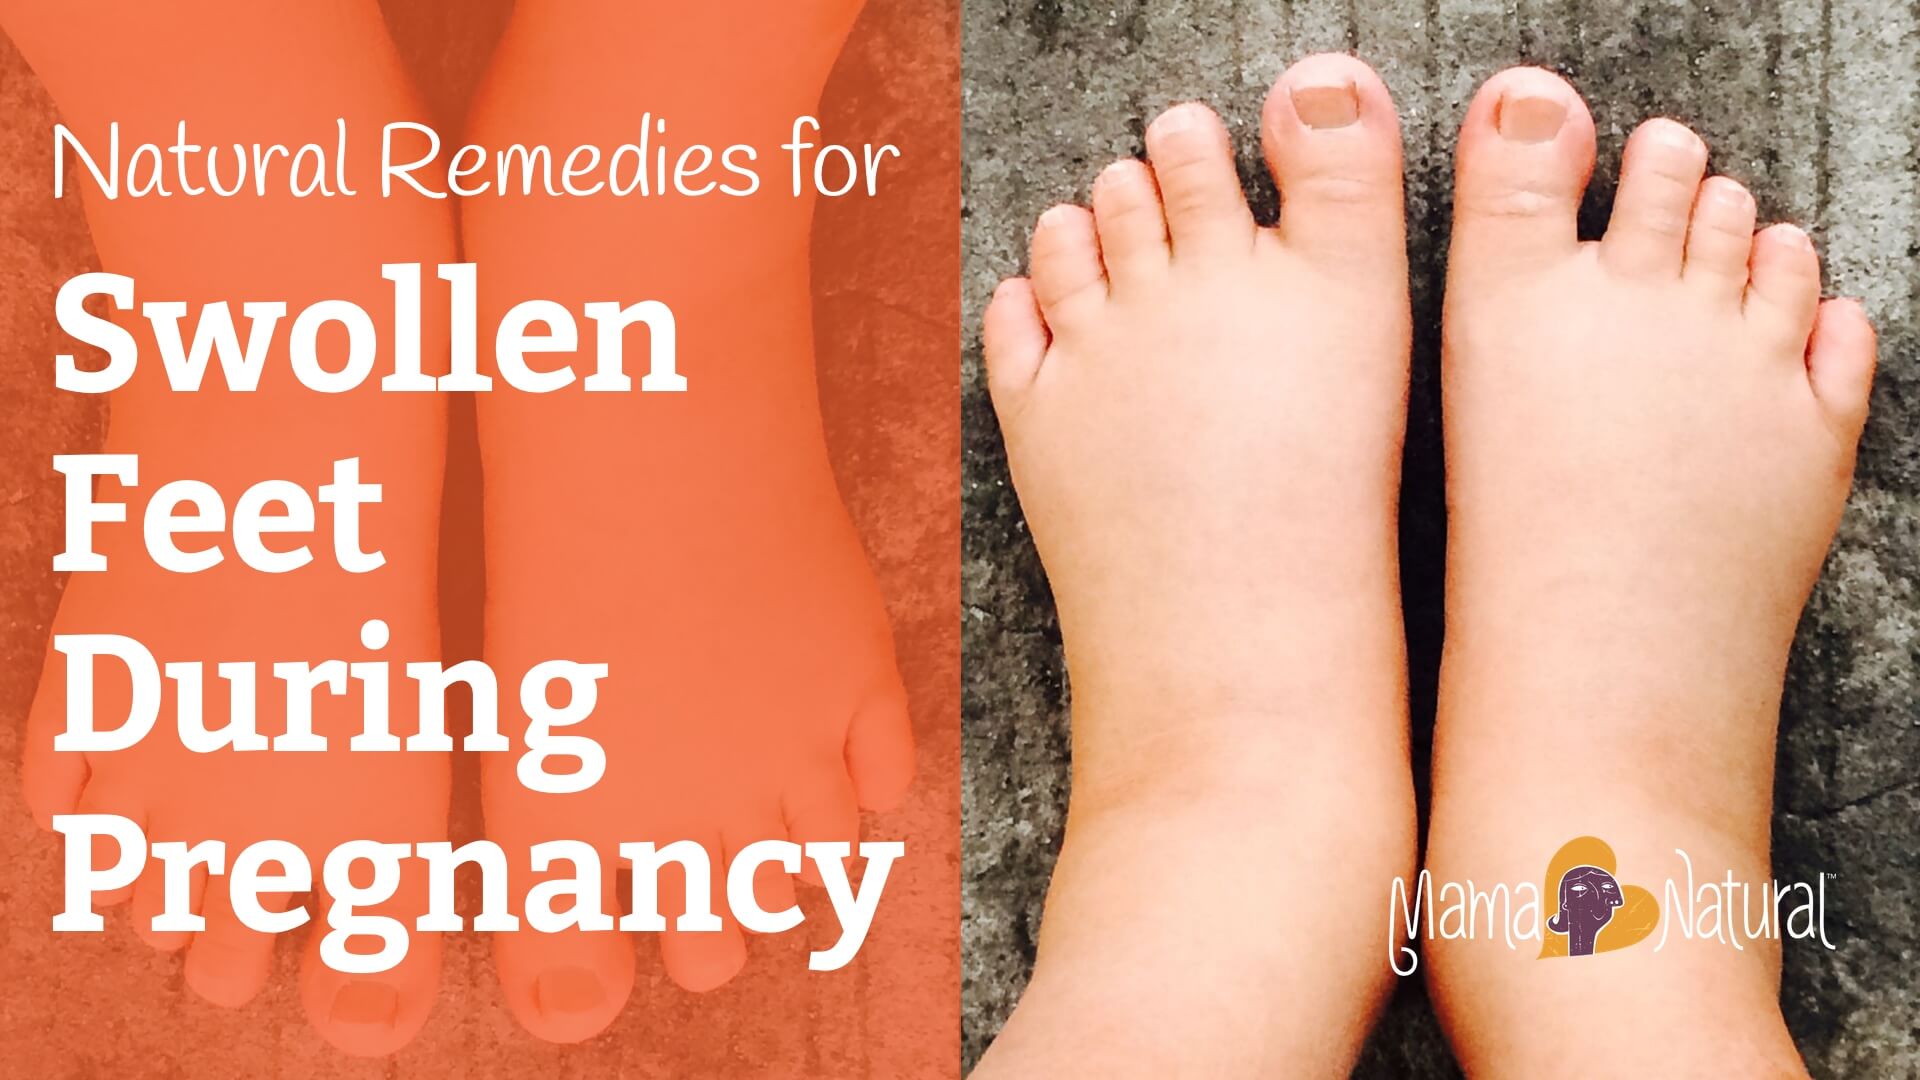 Swollen feet during pregnancy? Check these tips - Sanford Health News